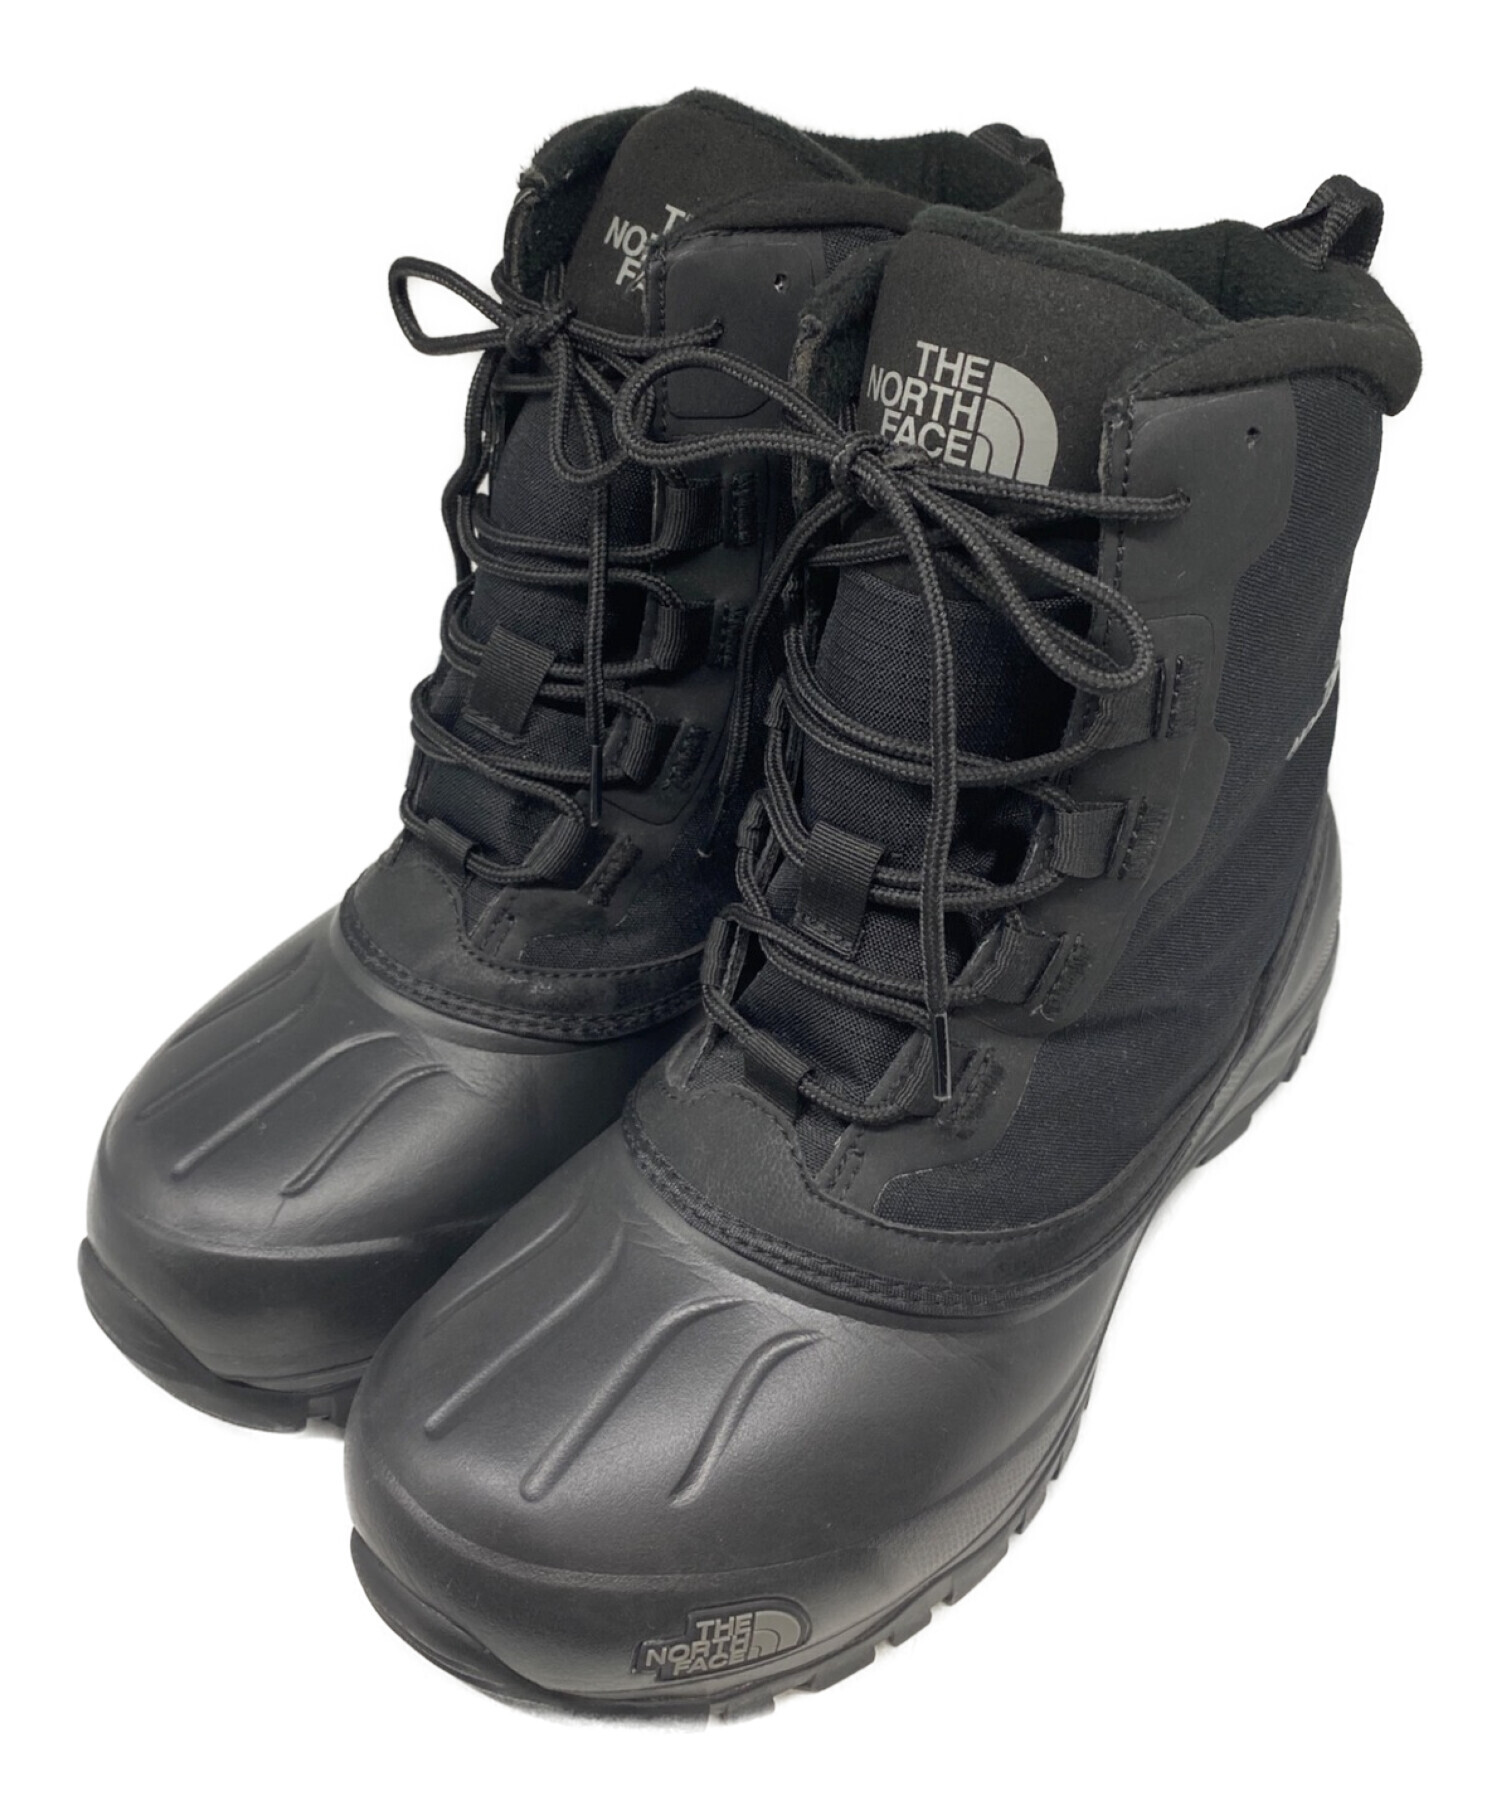 The North face snow boot